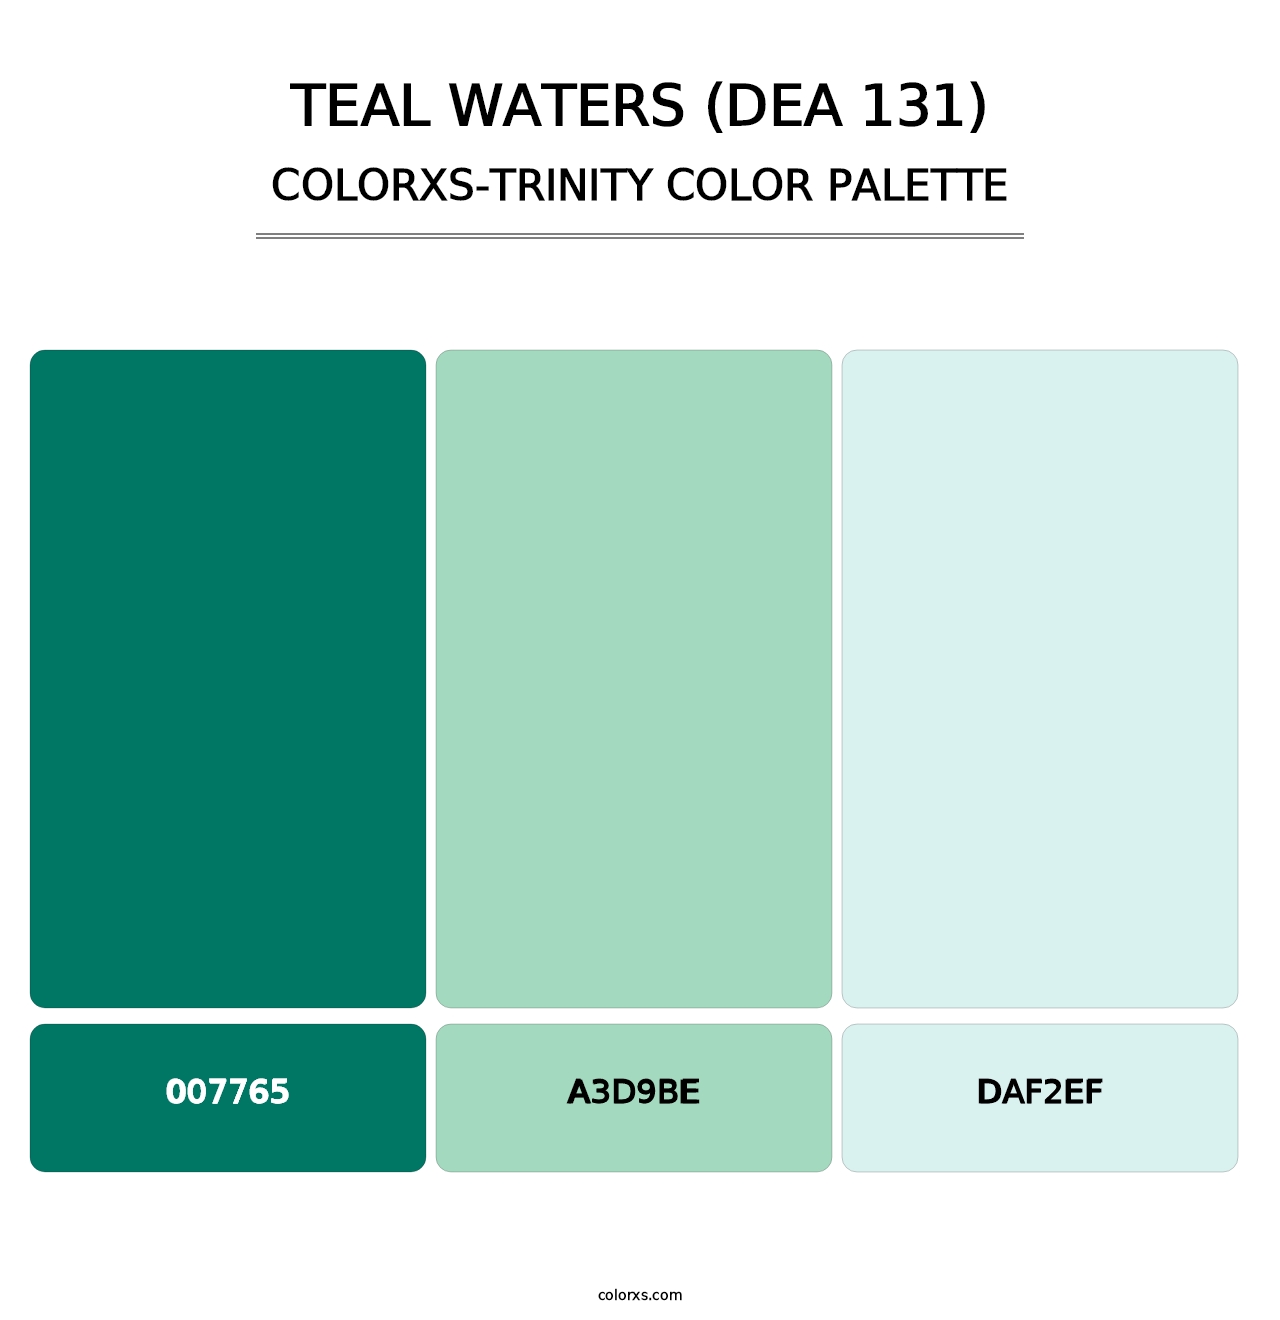 Teal Waters (DEA 131) - Colorxs Trinity Palette